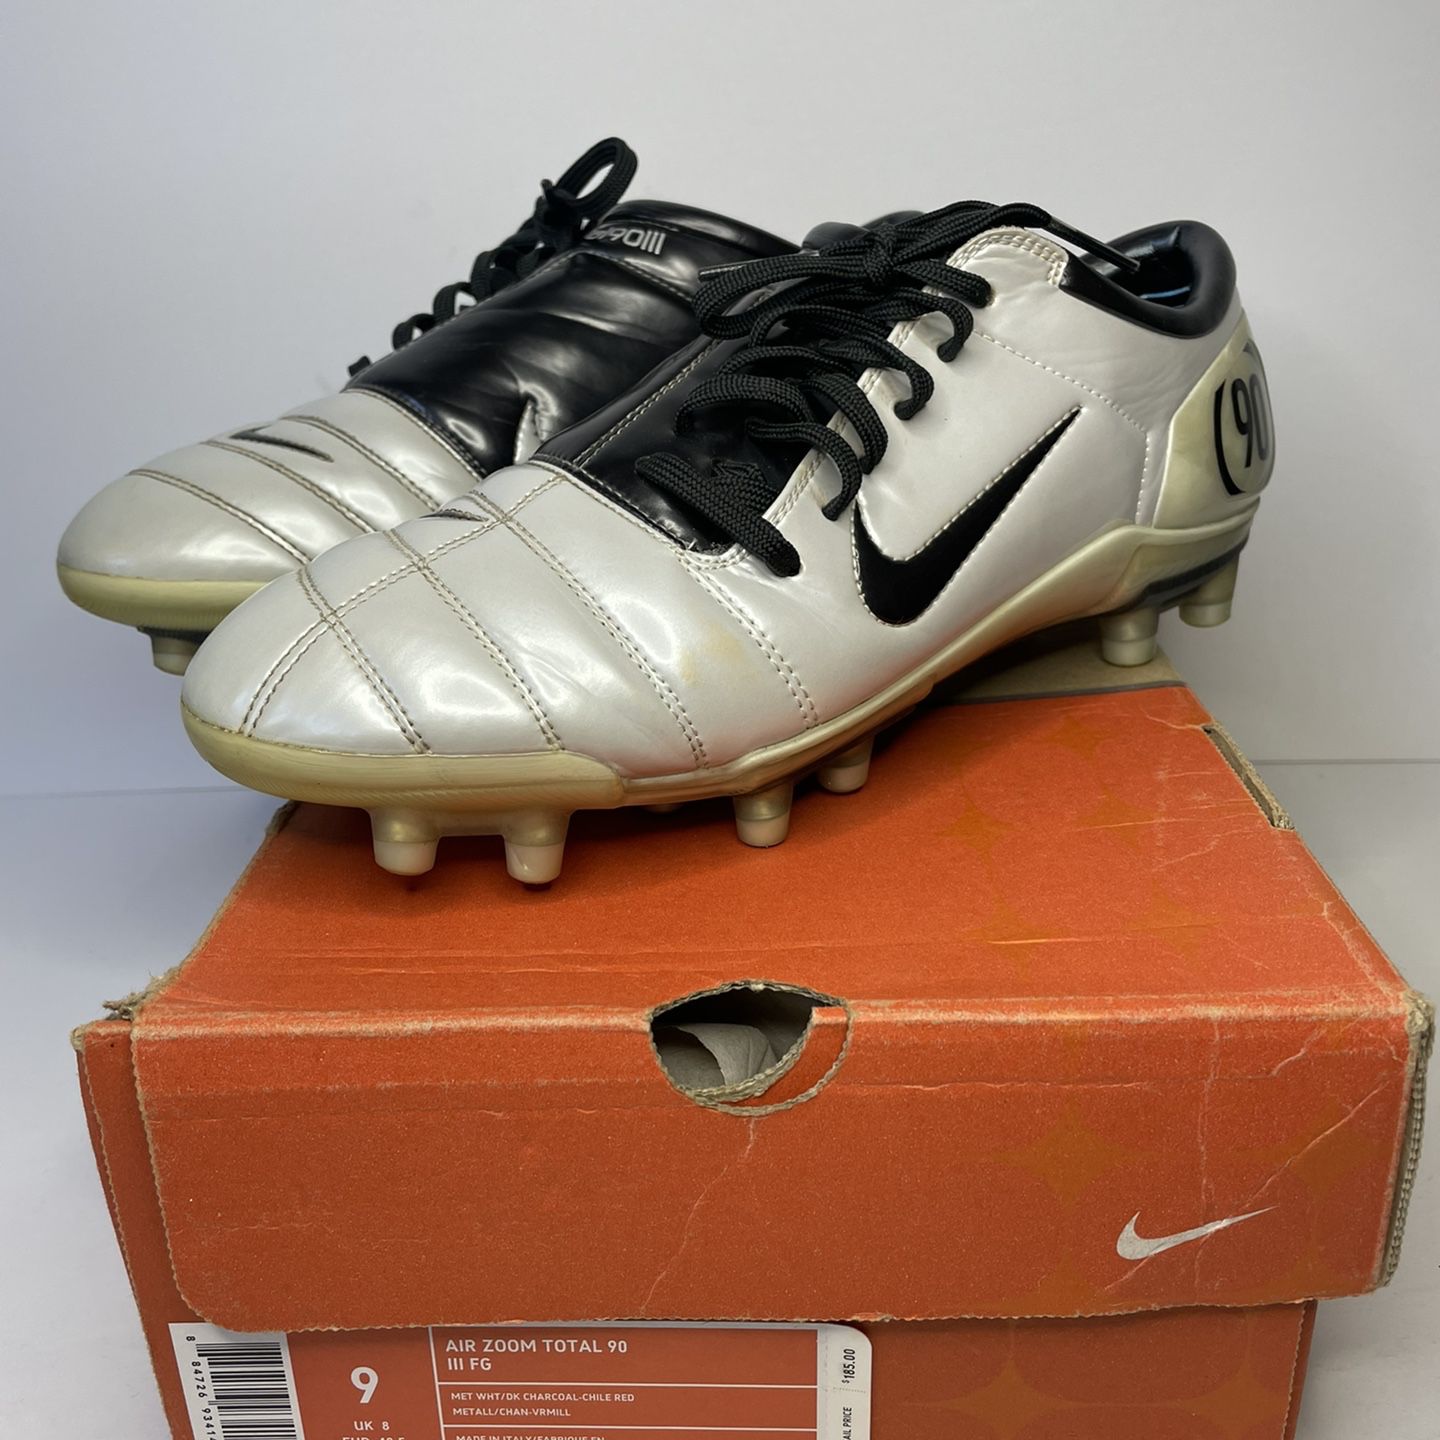 USED Nike Air Zoom Total 90 III FG 9 for Sale in Spanish Flat, CA OfferUp